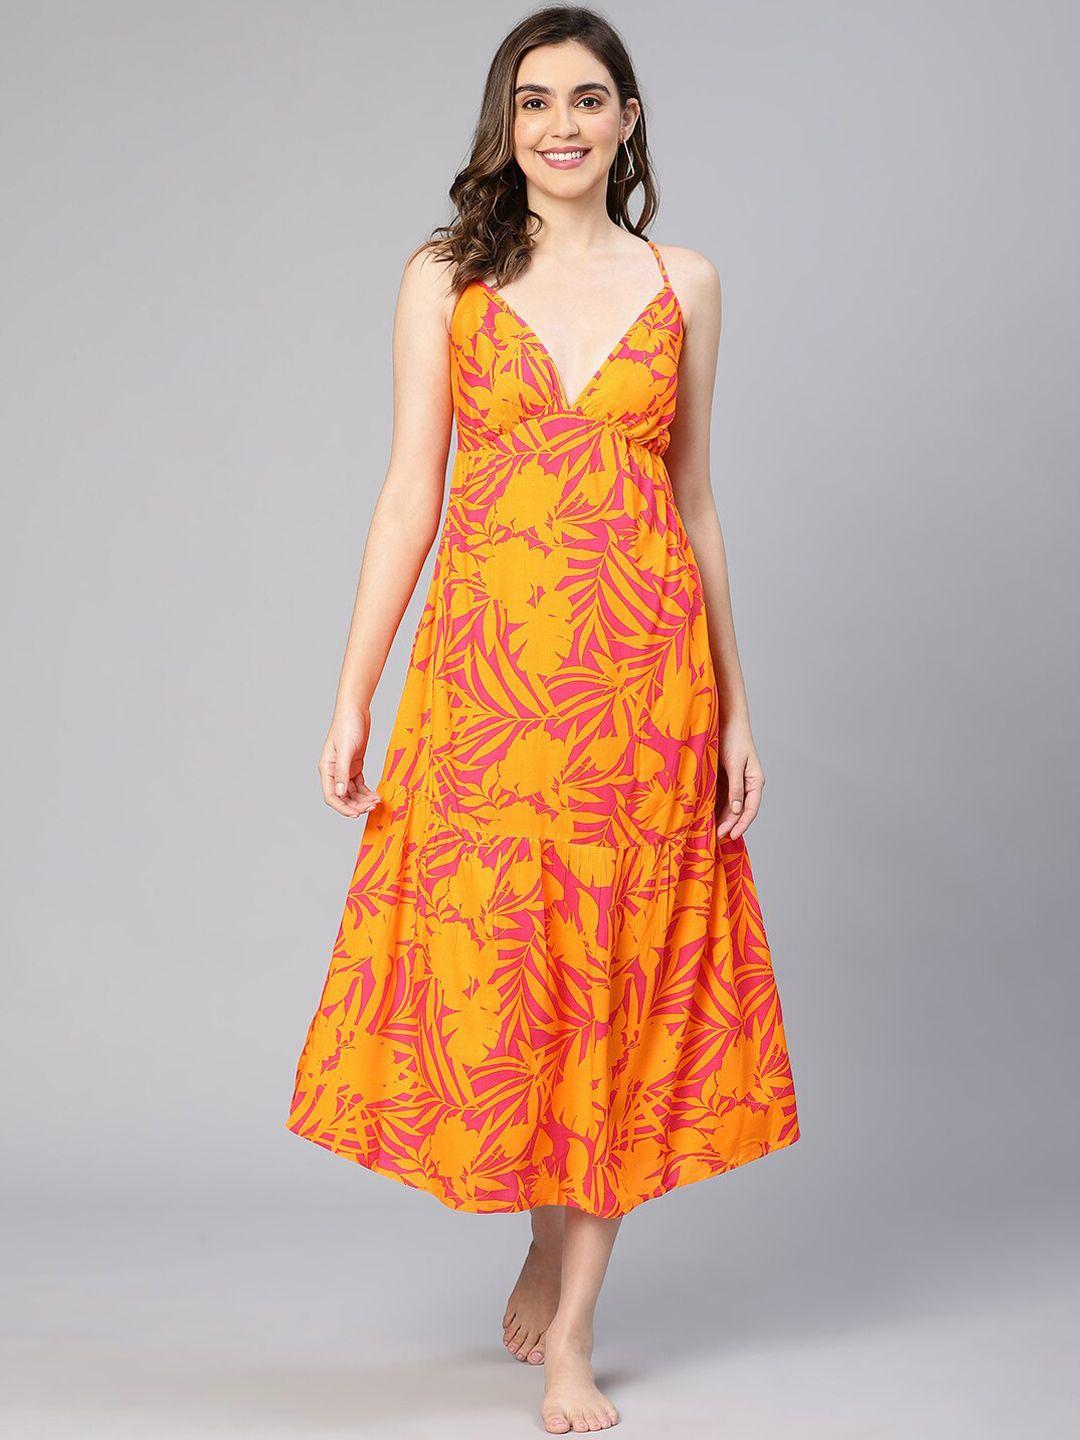 oxolloxo floral printed swimwear cover-up dress